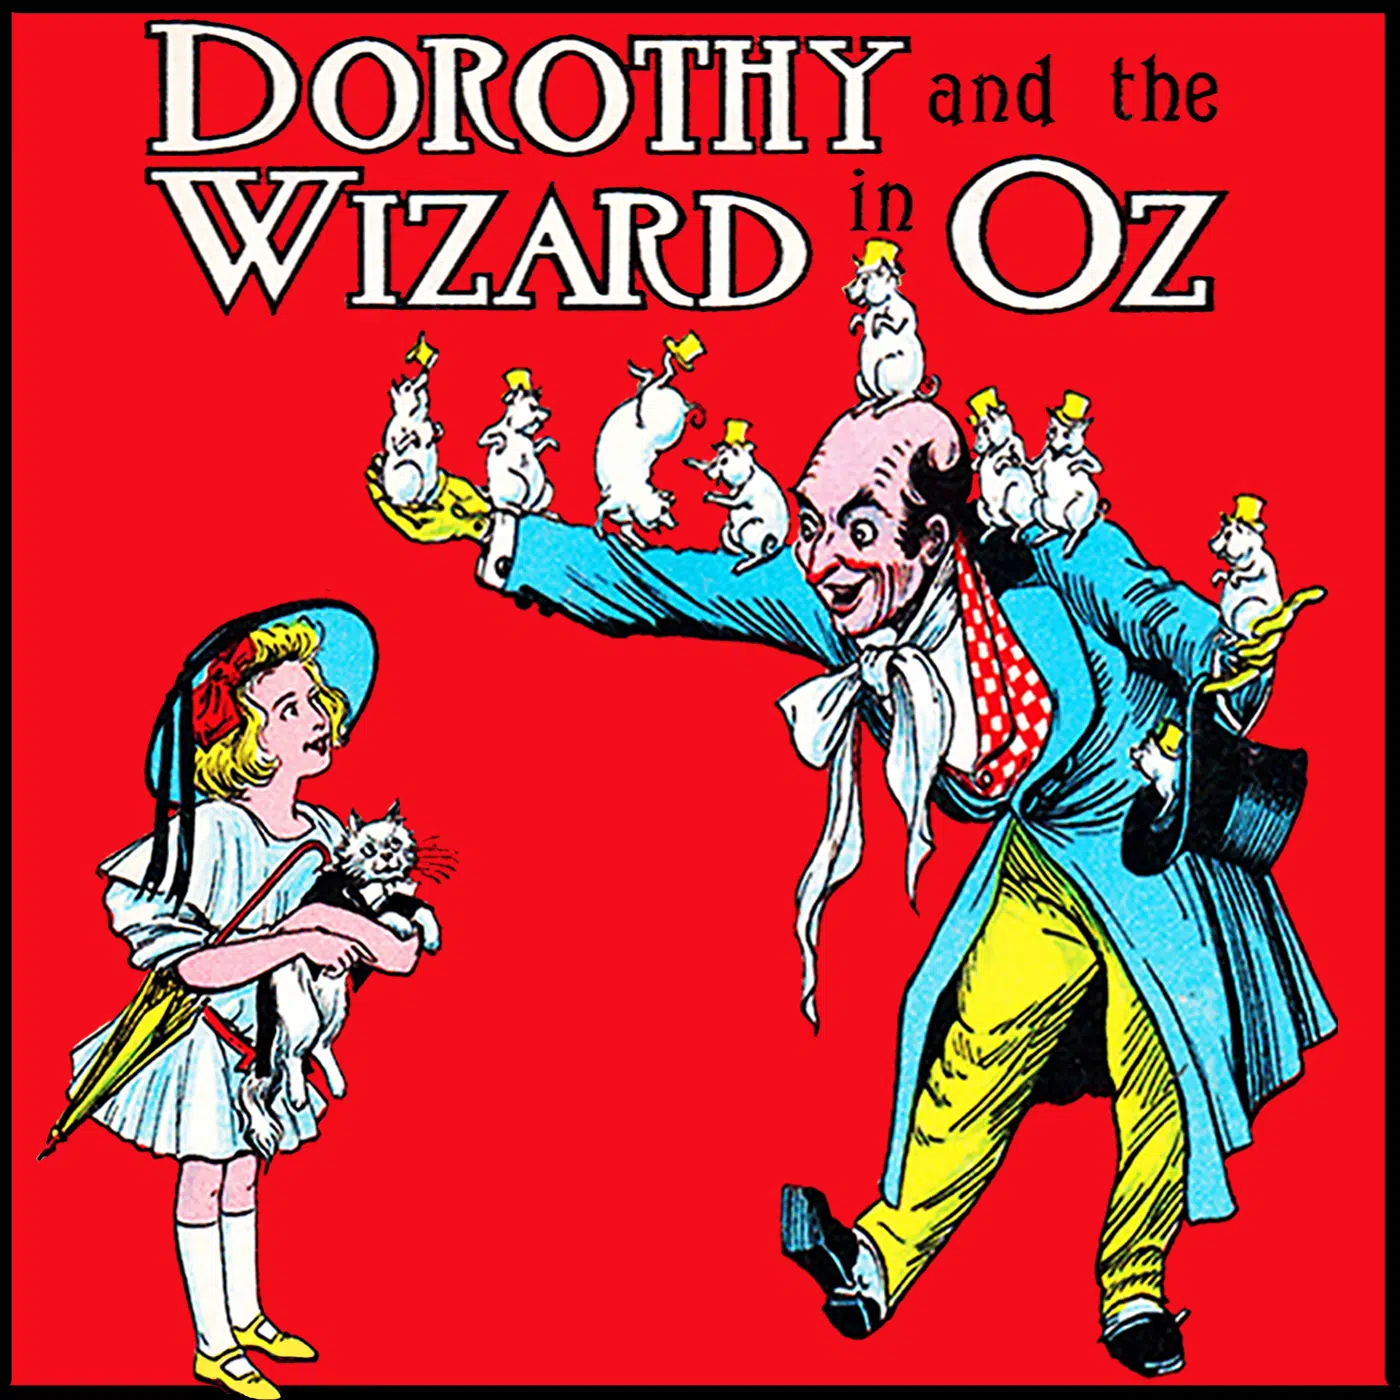 Dorthy and the Wizard in OZ